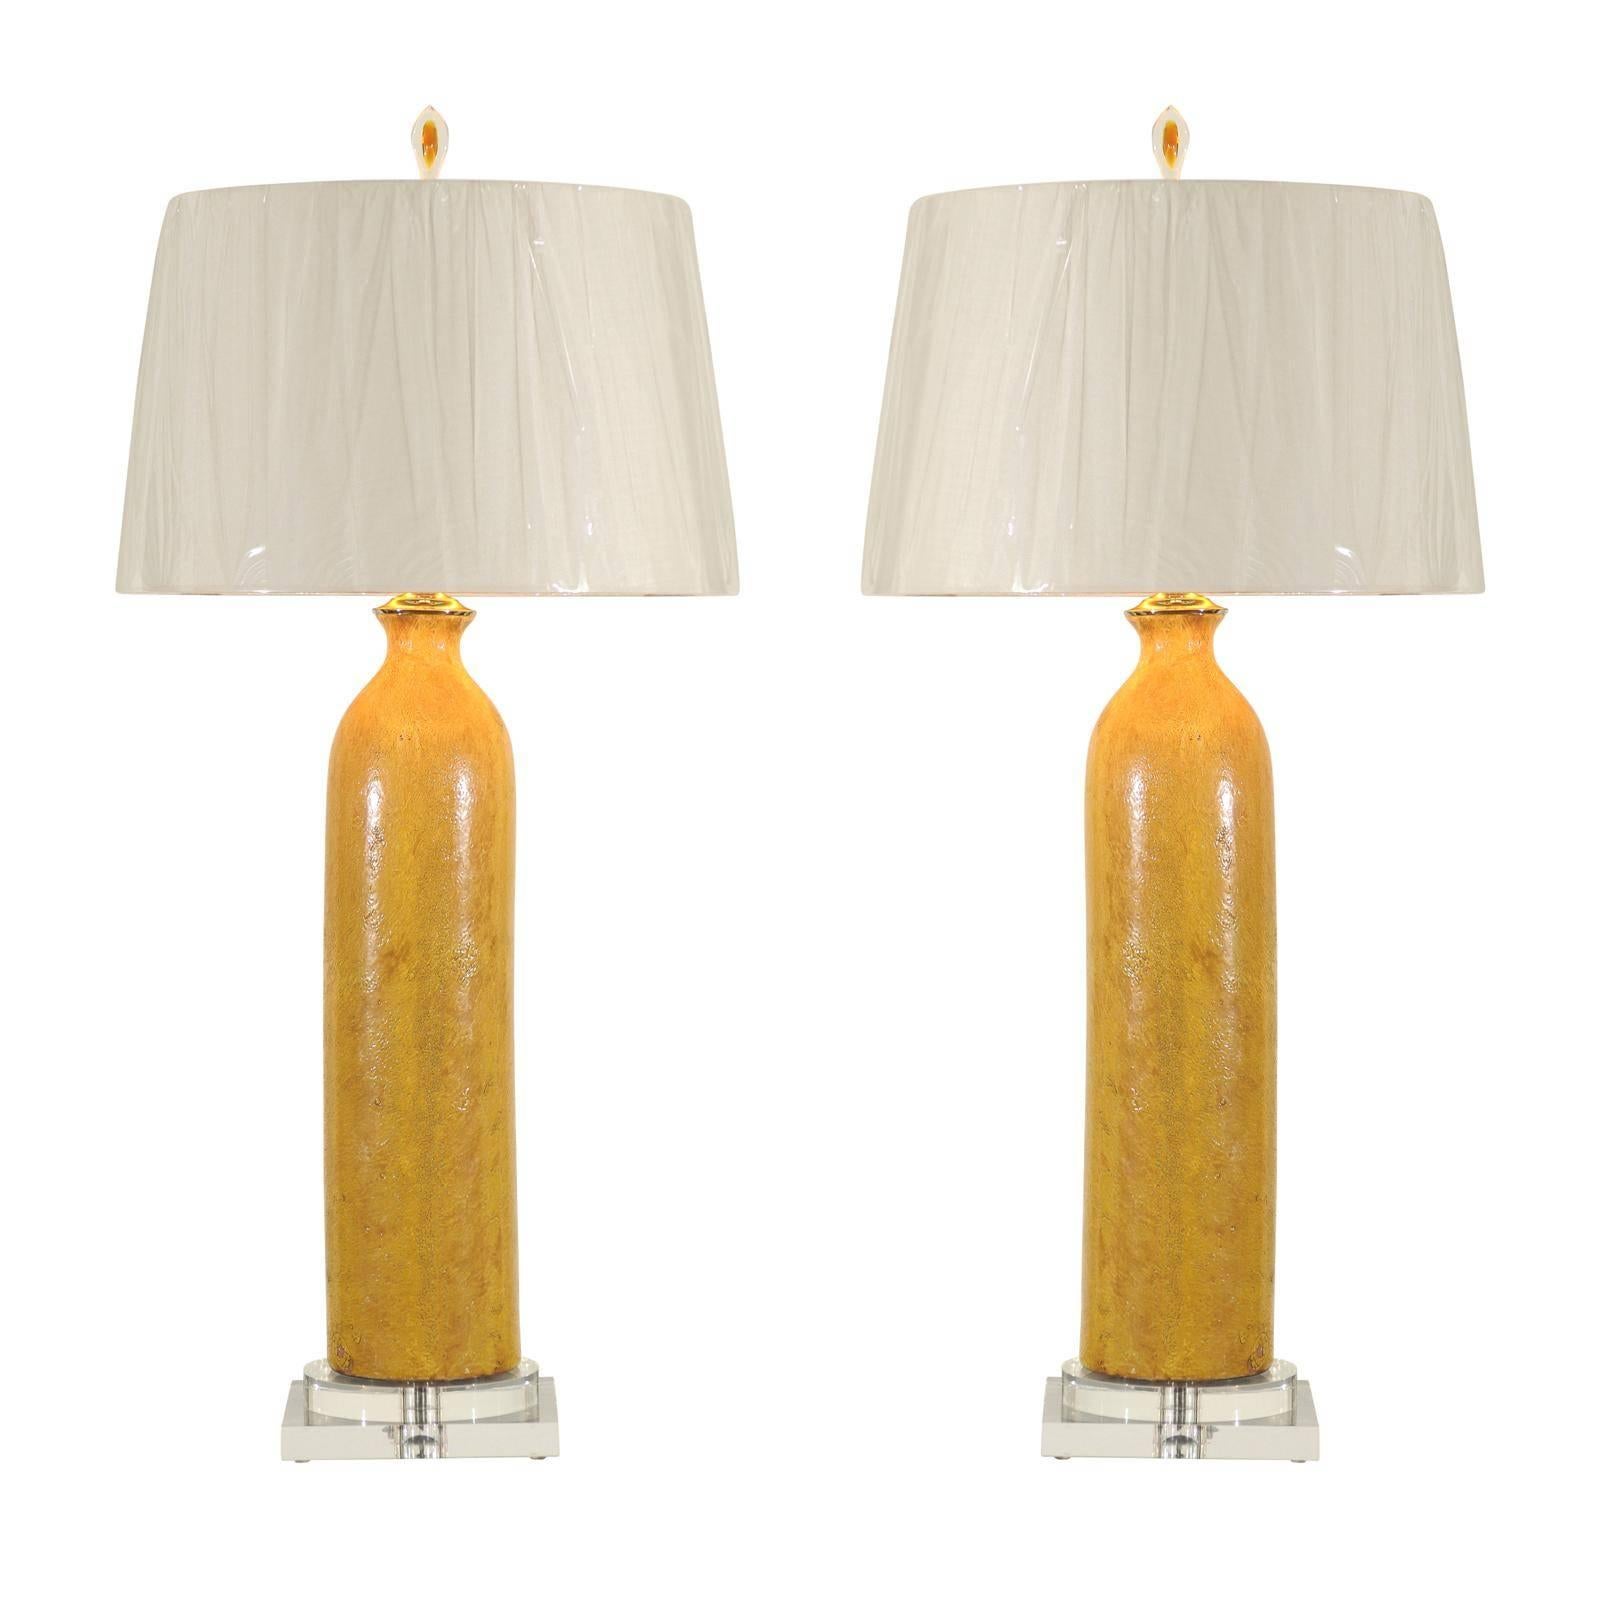 Stellar Restored Pair of Large-Scale Vintage Ceramic Lamps in Yellow Ochre